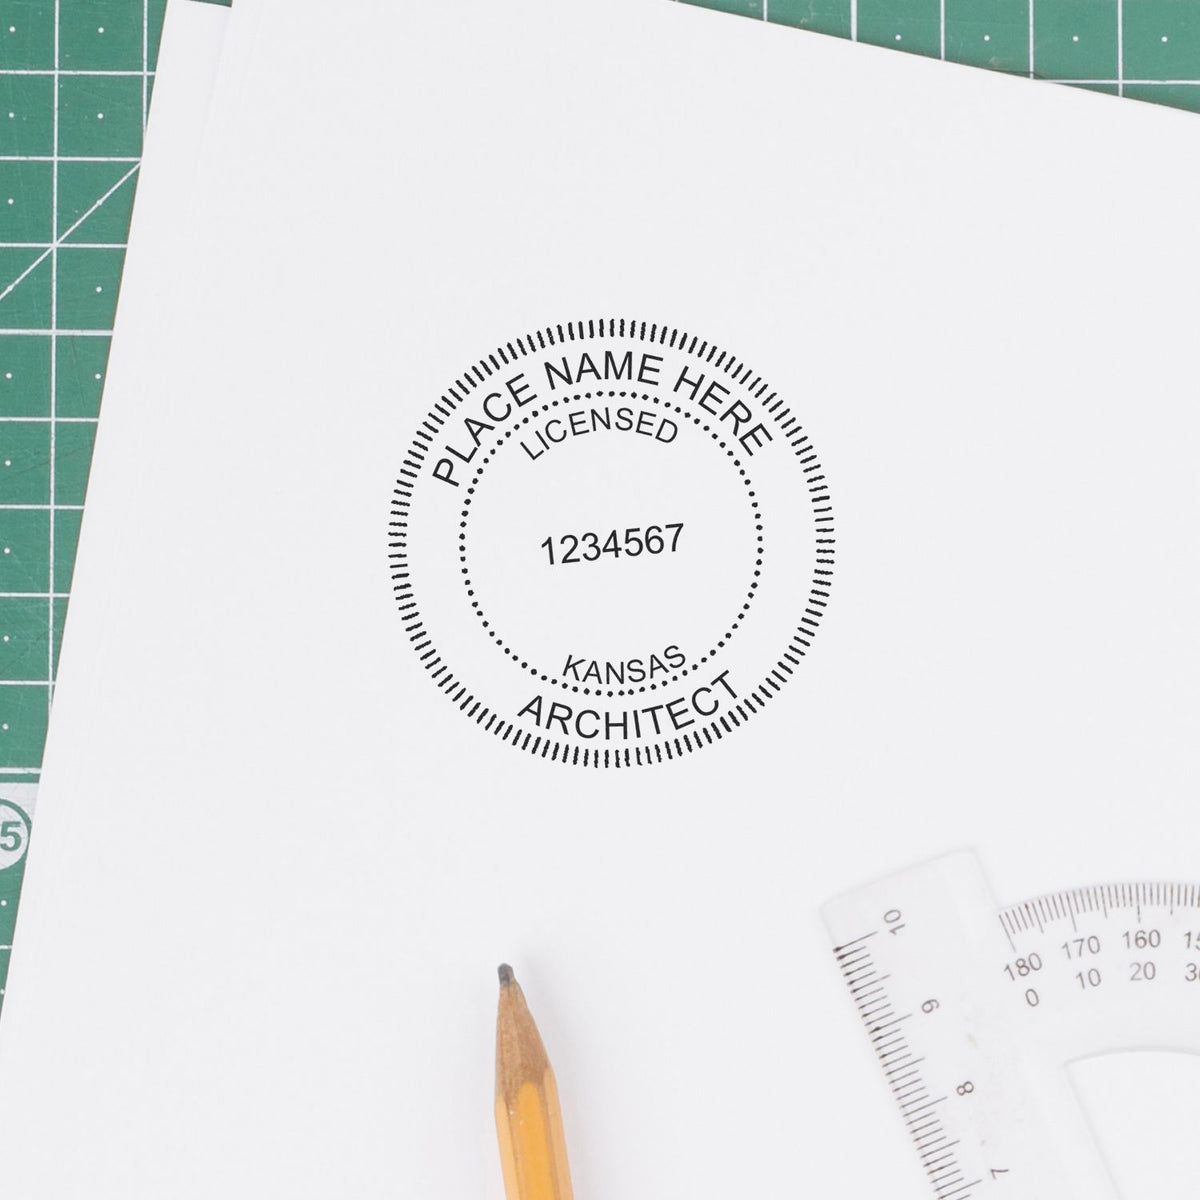 A stamped impression of the Slim Pre-Inked Kansas Architect Seal Stamp in this stylish lifestyle photo, setting the tone for a unique and personalized product.